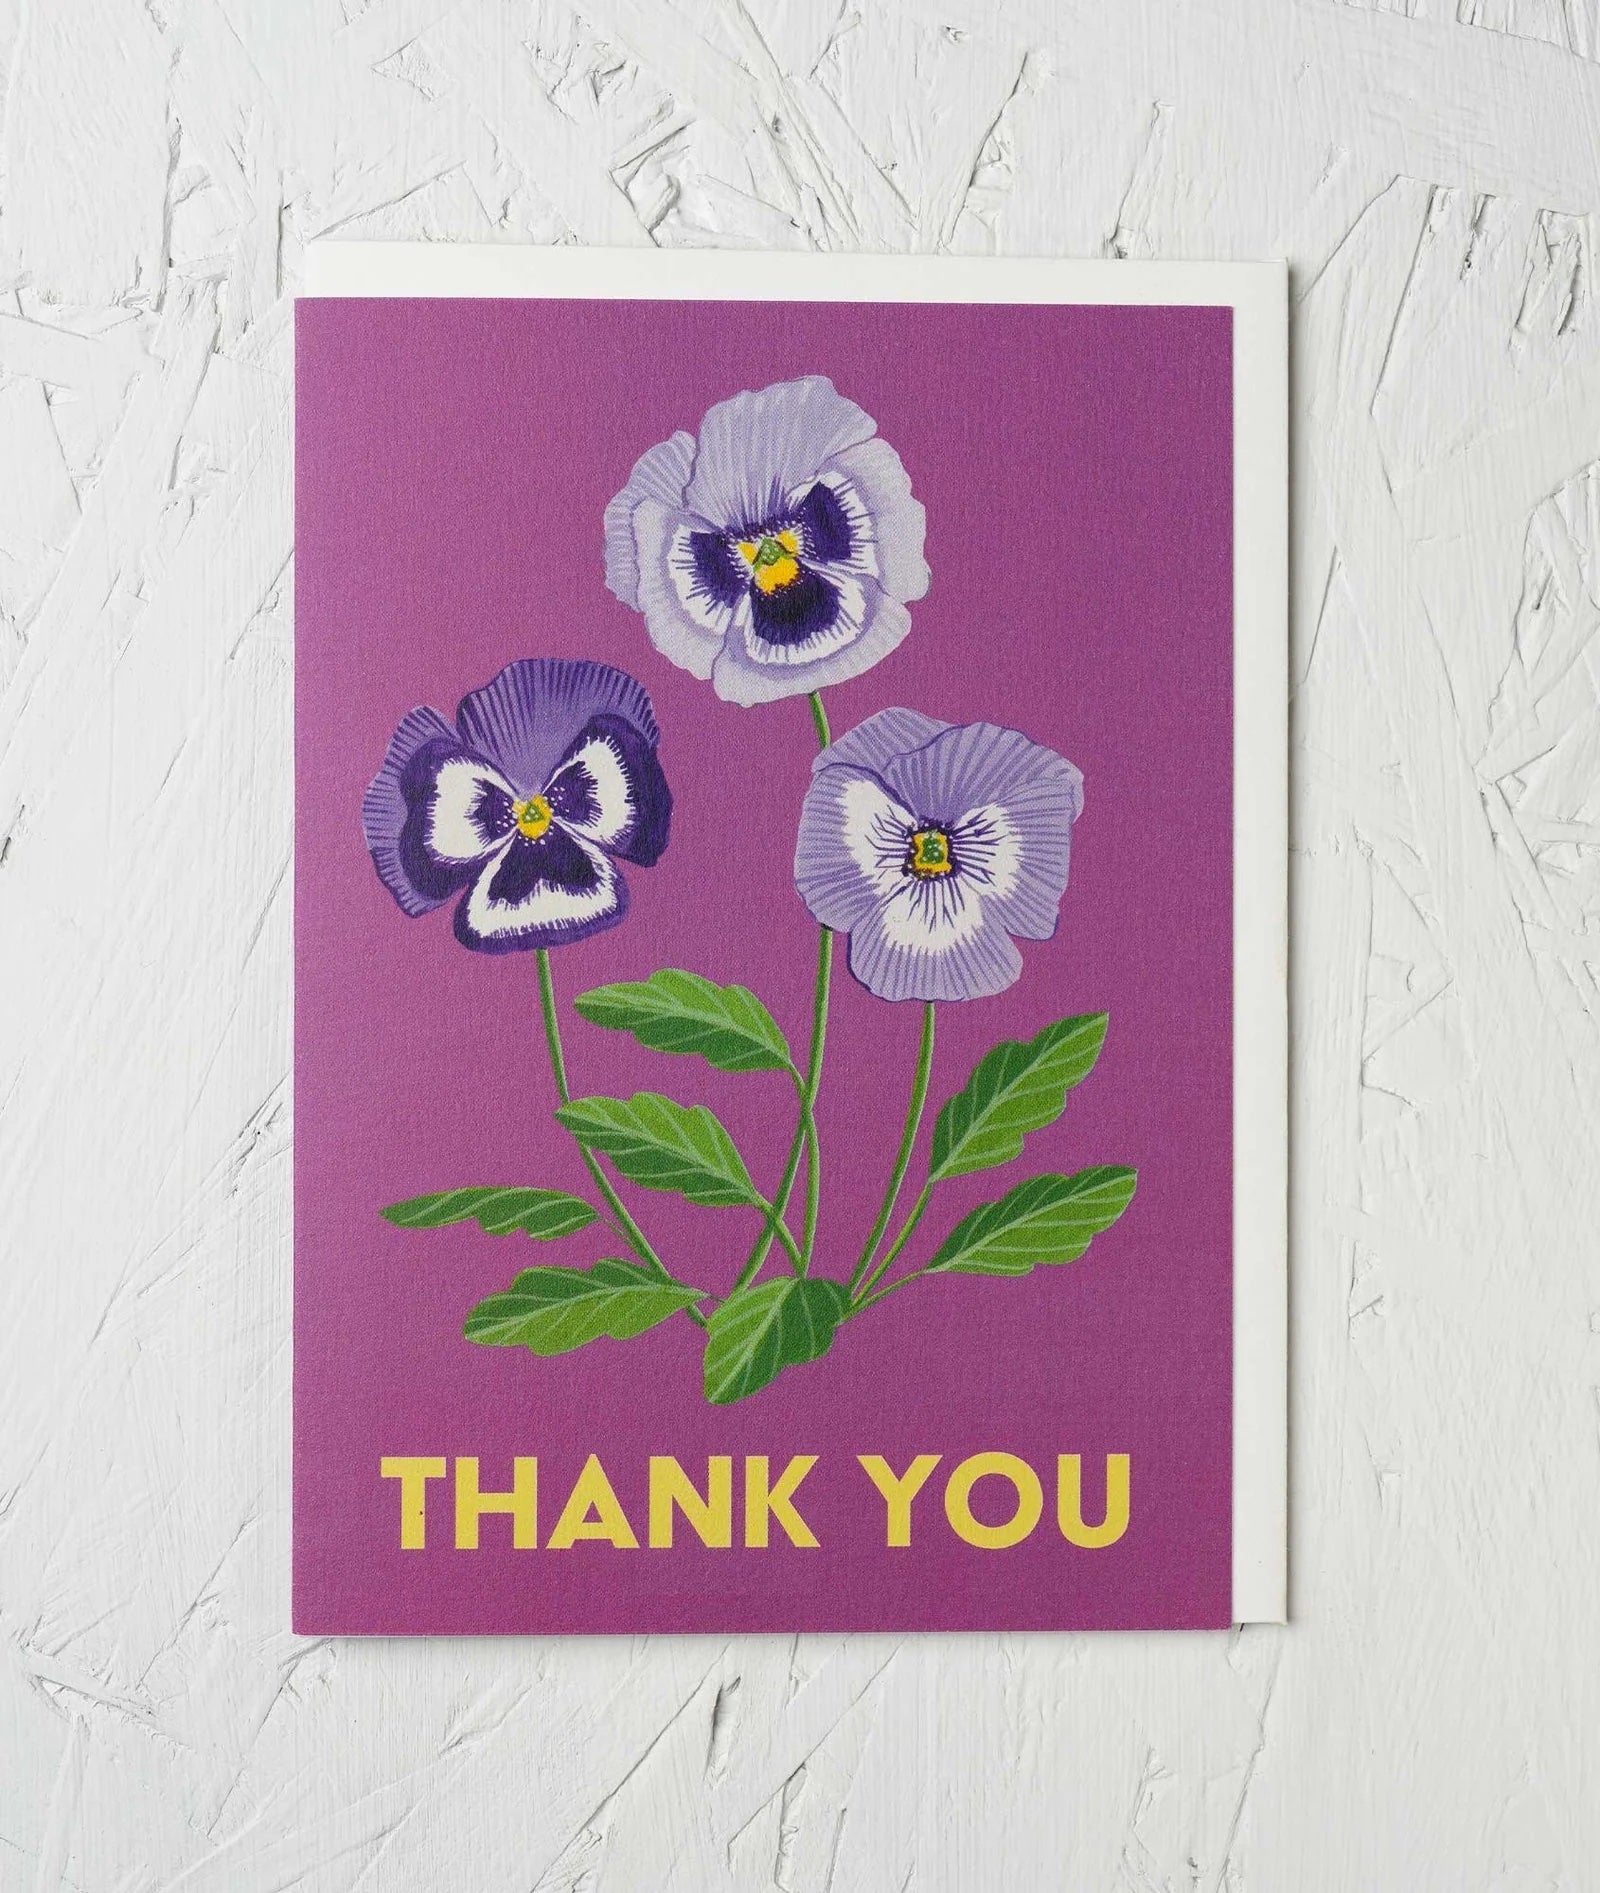 Thank You- Stengun Drawings - Cards